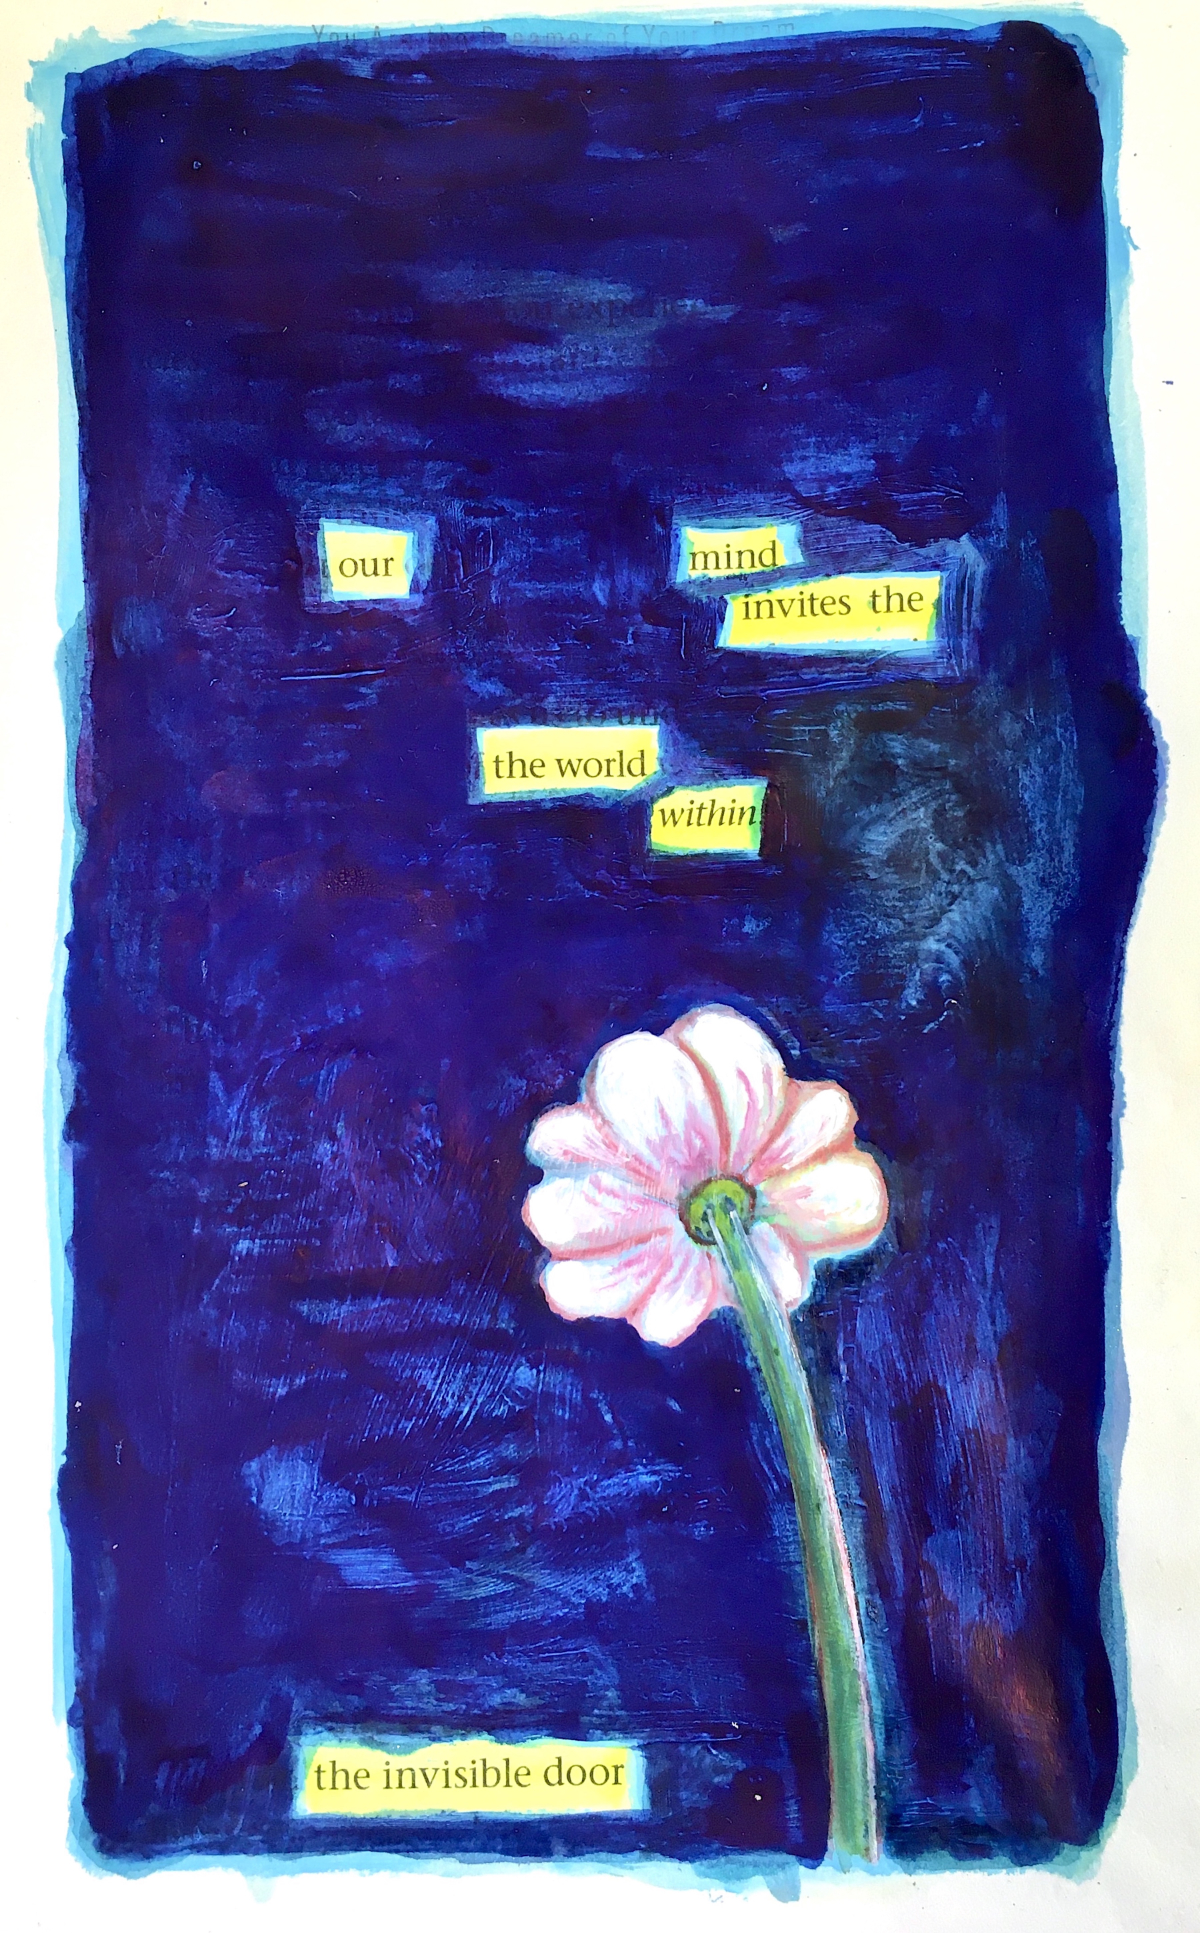 painted over page of text revealed to say our mind invites the world within the invisible door